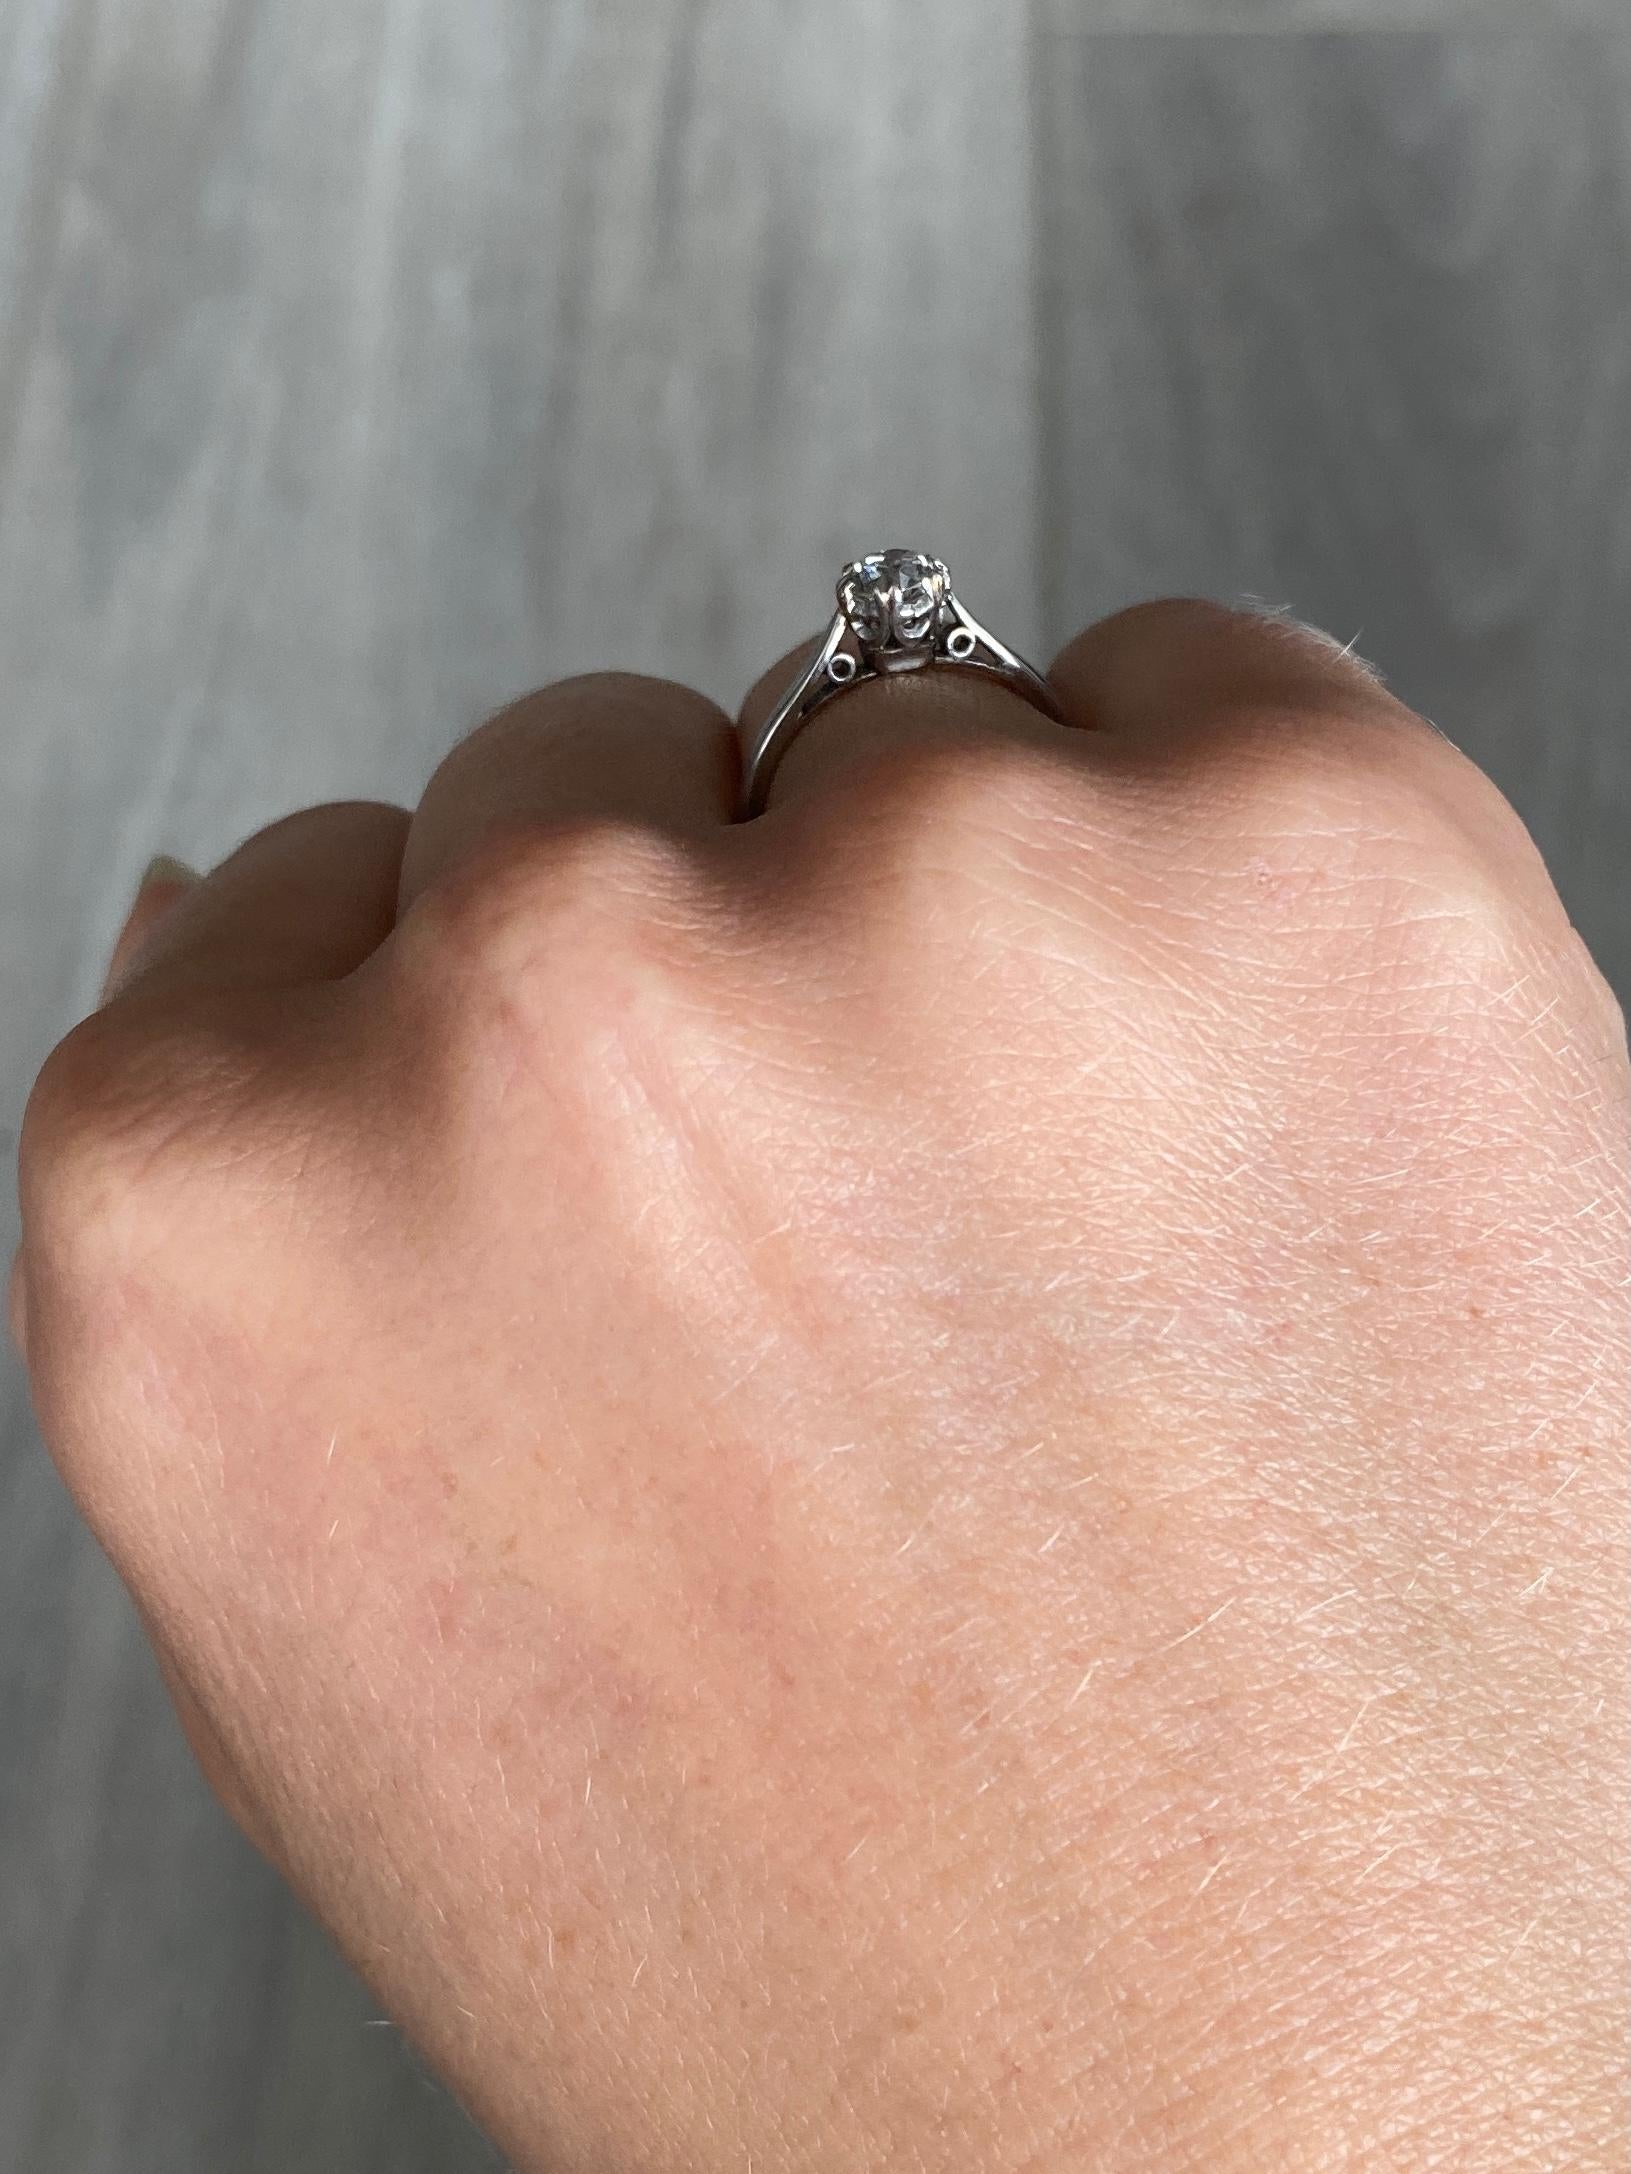 The diamond in this ring measures 50pts. The stone has a wonderful glisten to it. The ring is modelled out of platinum. 

Ring Size: L or 5 3/4
Height Off Finger: 5.5mm

Weight: 2.1g